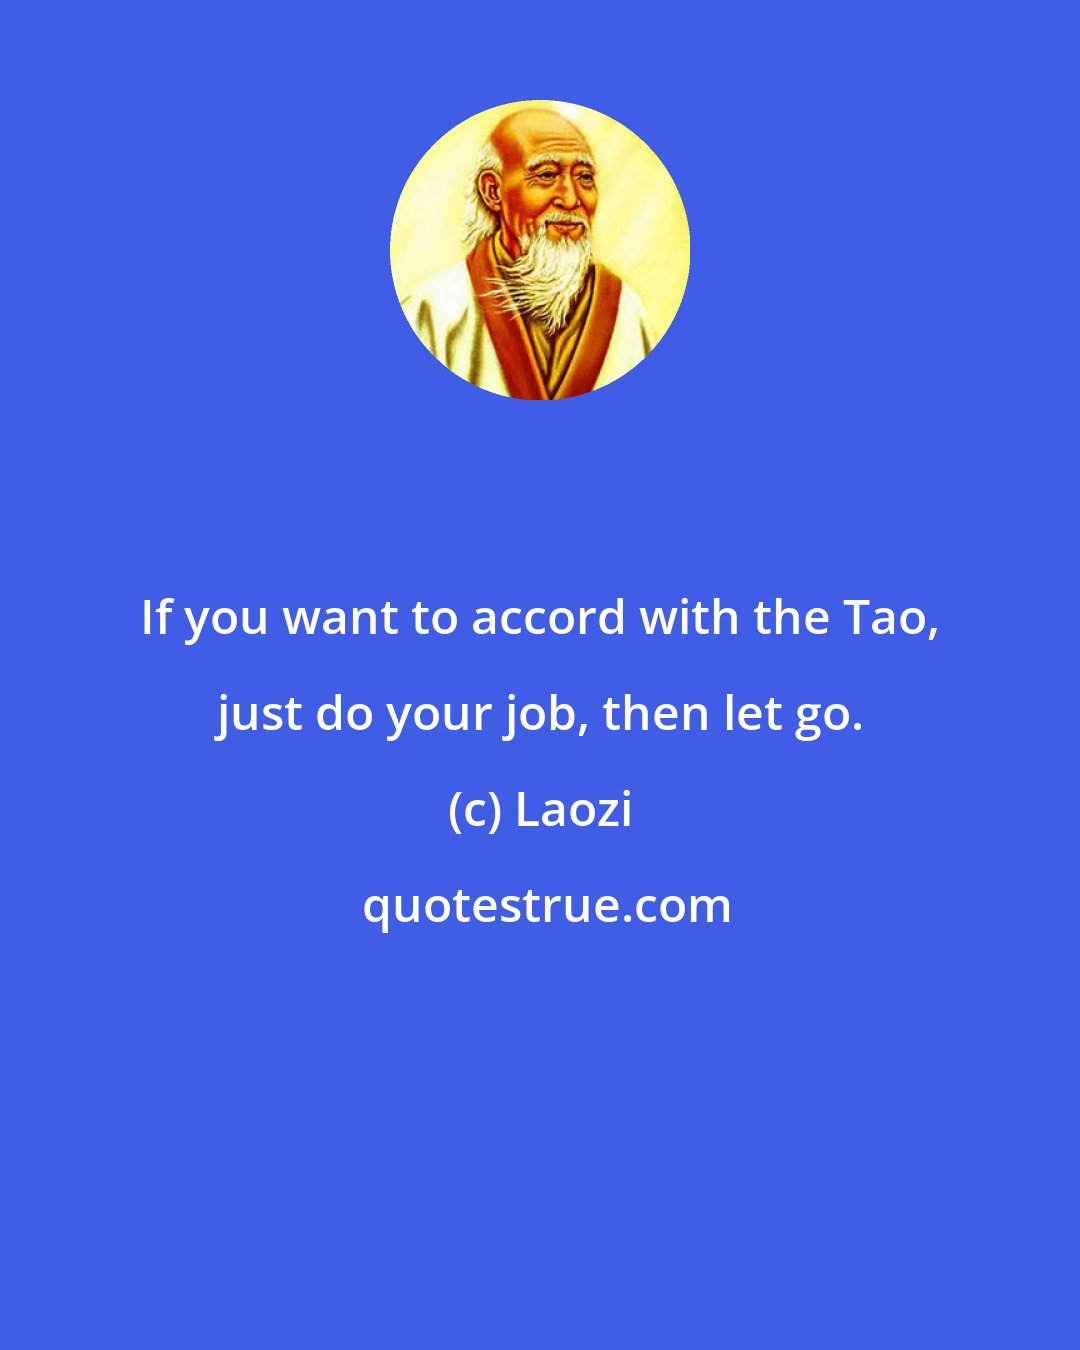 Laozi: If you want to accord with the Tao, just do your job, then let go.